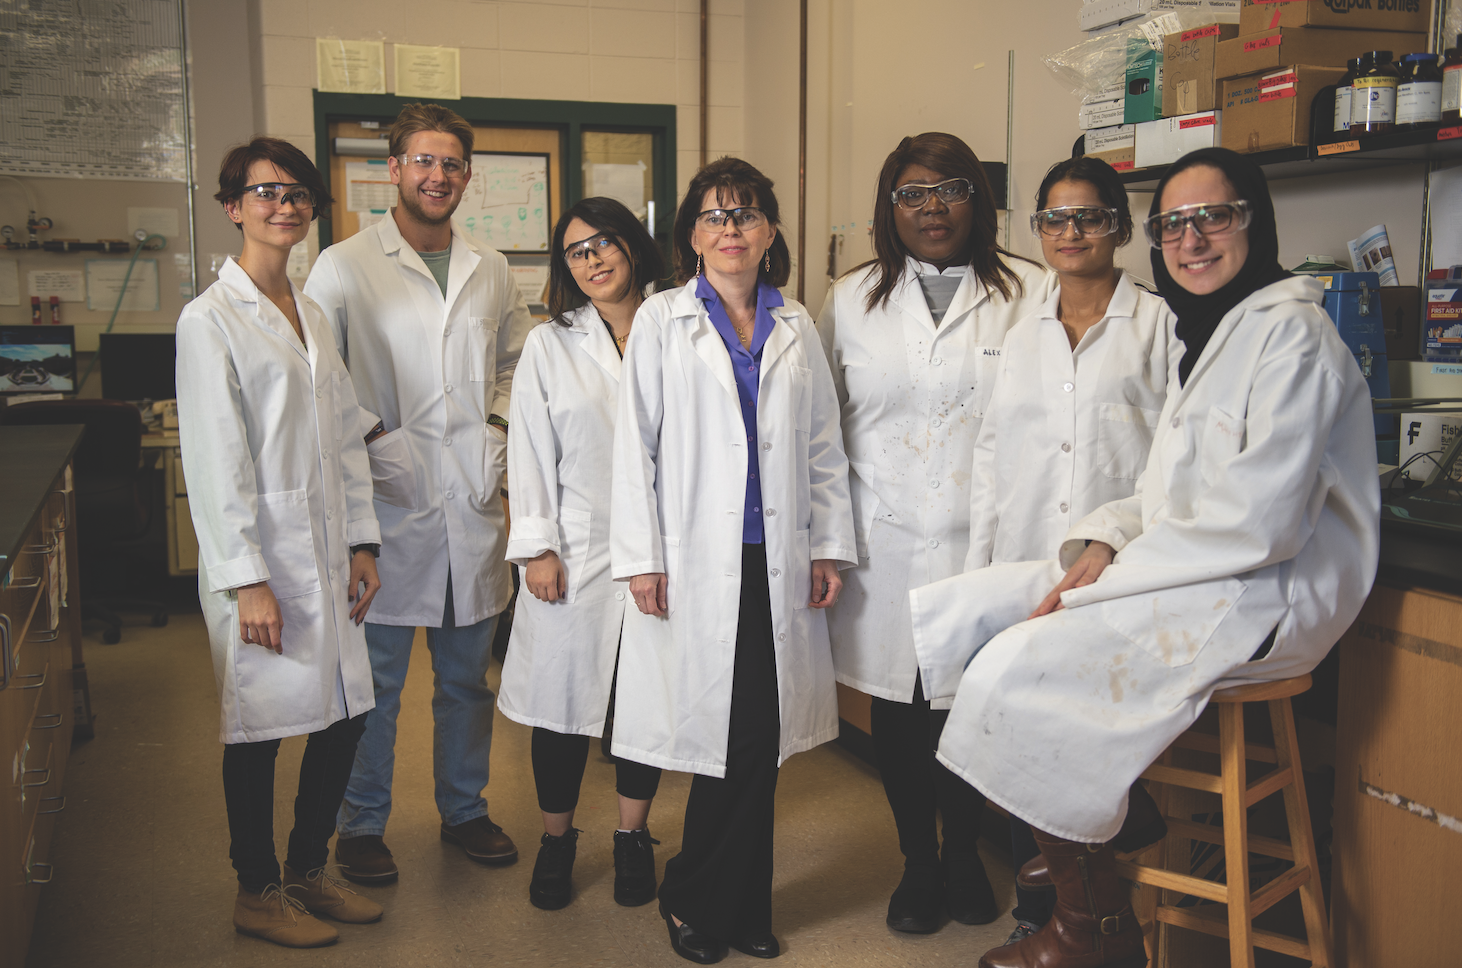 Virginia Davis (center), alumni professor in Chemical Engineering, recently won a $342,502 grant from the National Science Foundation to investigate the factors influencing the attitudes of minority youth in underserved communities toward science and engineering.